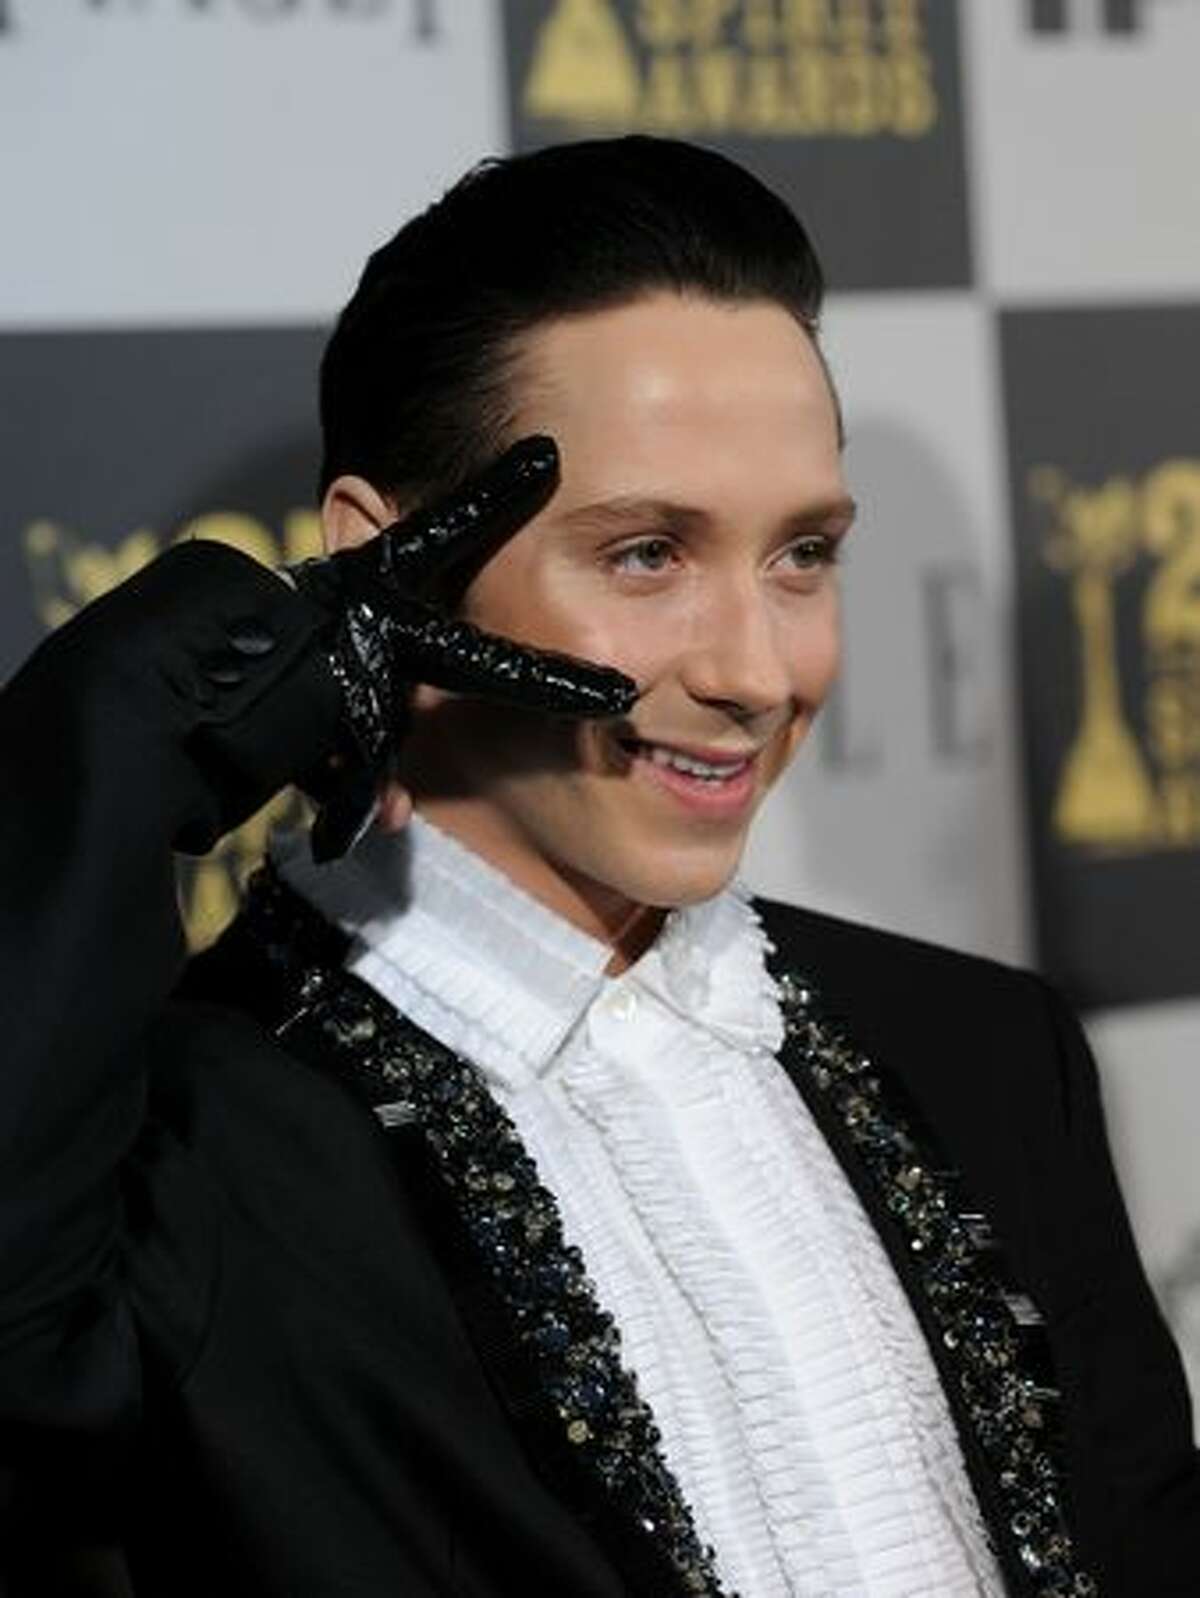 Figure skater Johnny Weir arrives at the 25th Film Independent's Spirit Awards held at Nokia Event Deck at L.A. Live on March 5, 2010 in Los Angeles, California.